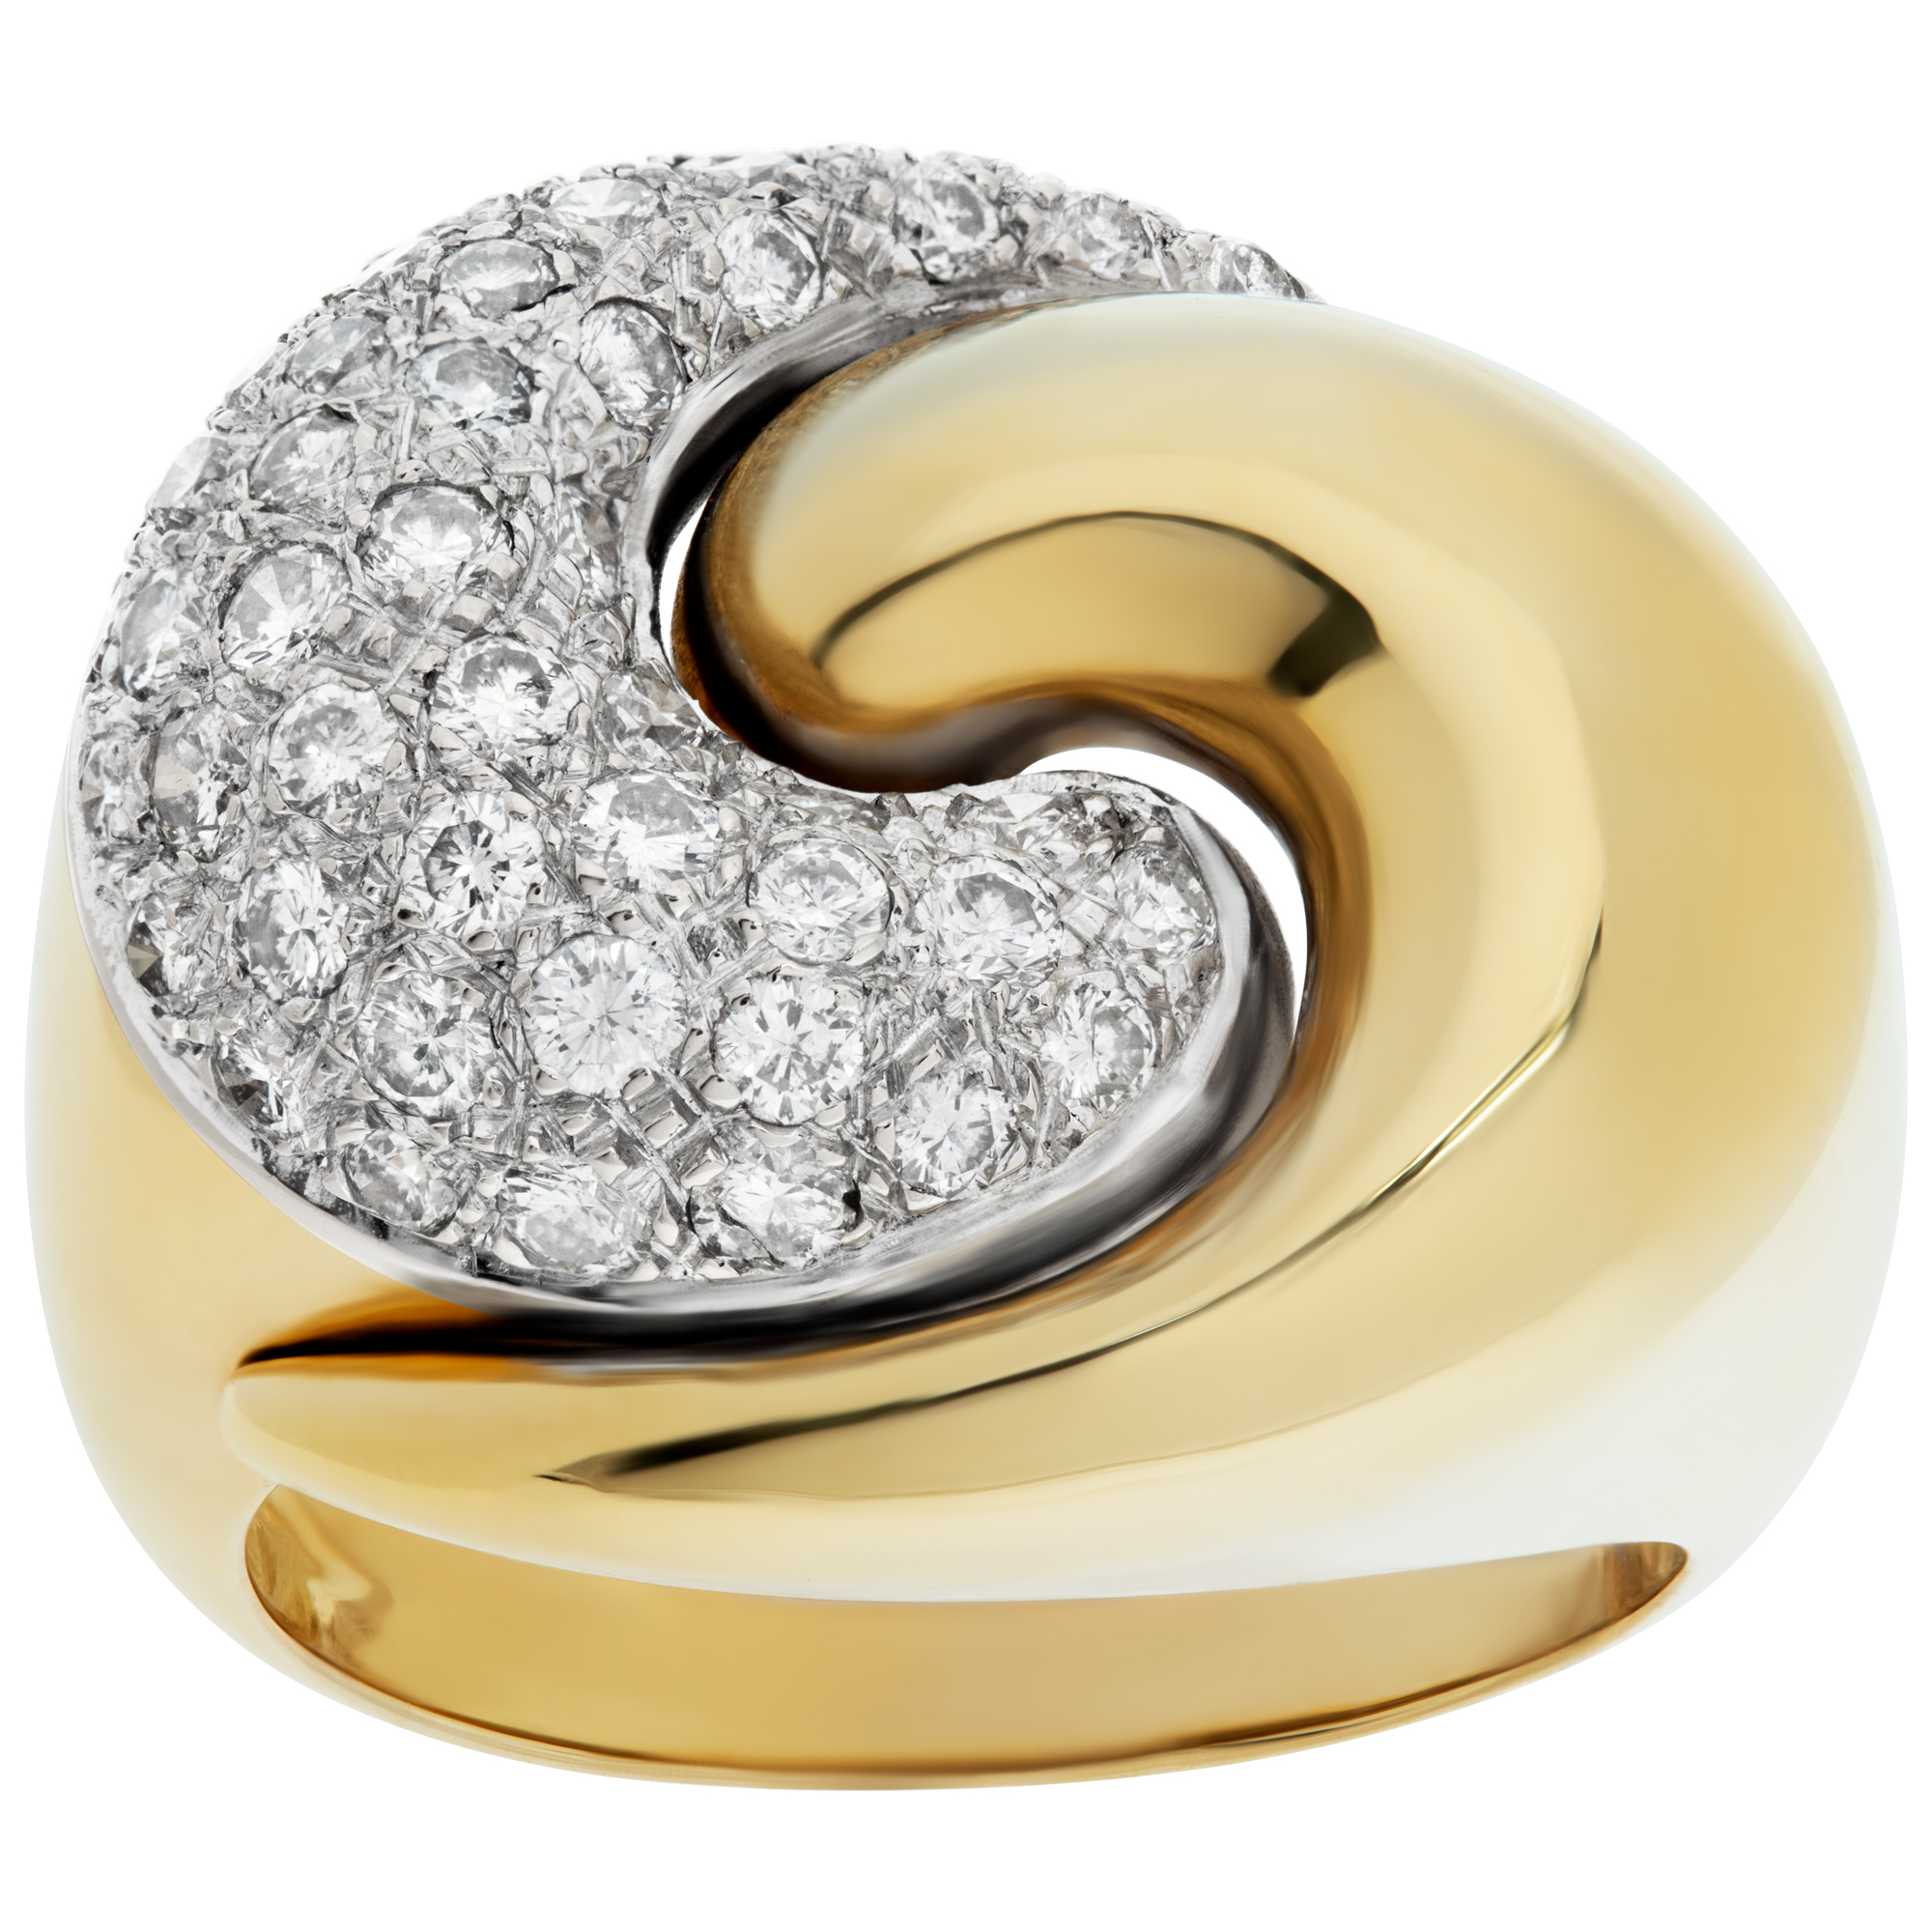 Pave diamond ring in 18k yellow gold with approximately 1.00 carat round brilliant cut diamonds. image 1